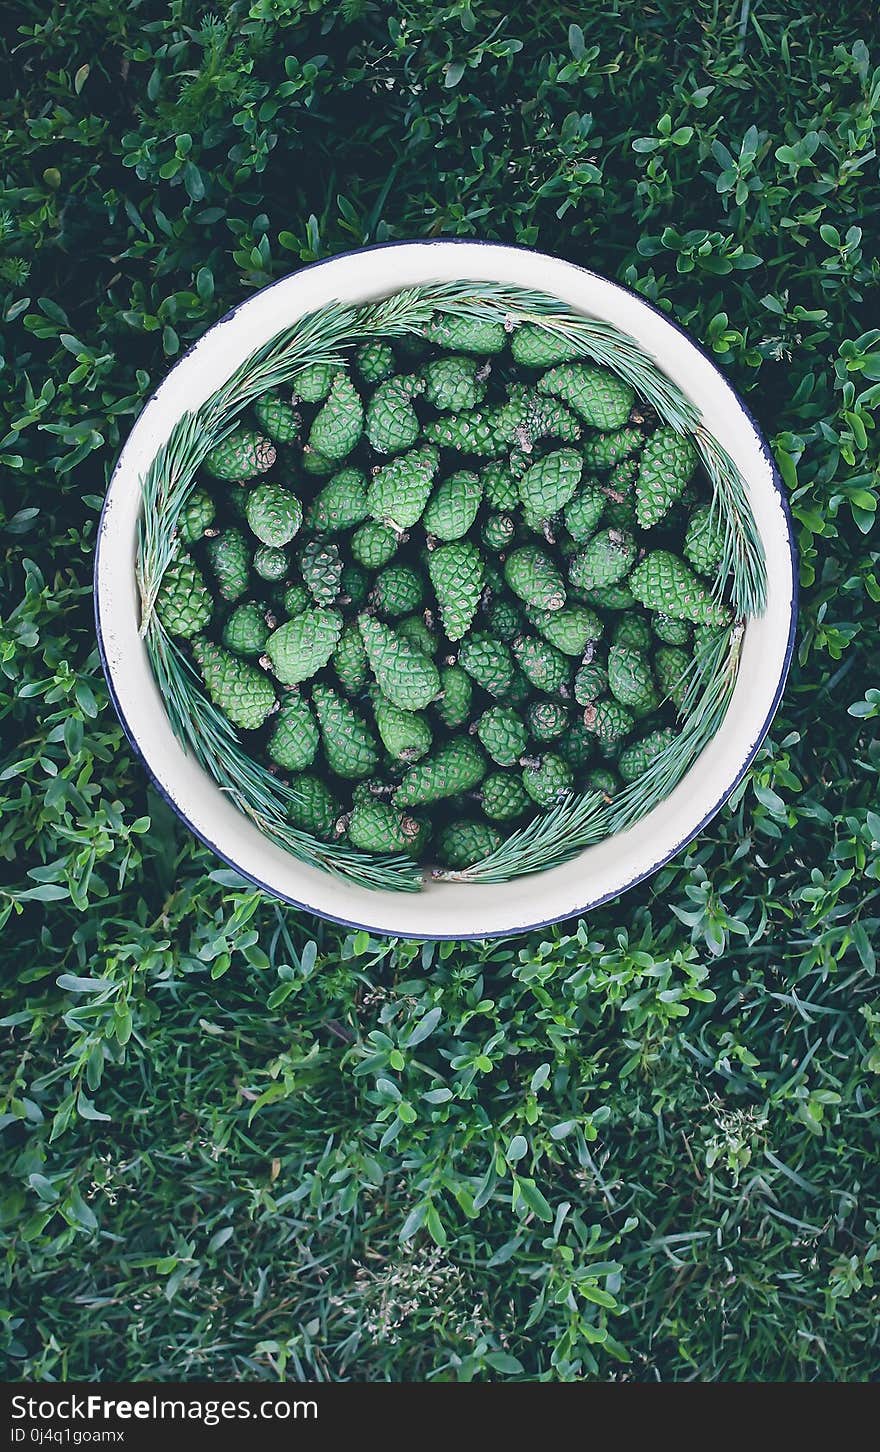 Green young fir tree cones in a large cup prepared for homemade syrup cooking. Green young fir tree cones in a large cup prepared for homemade syrup cooking.